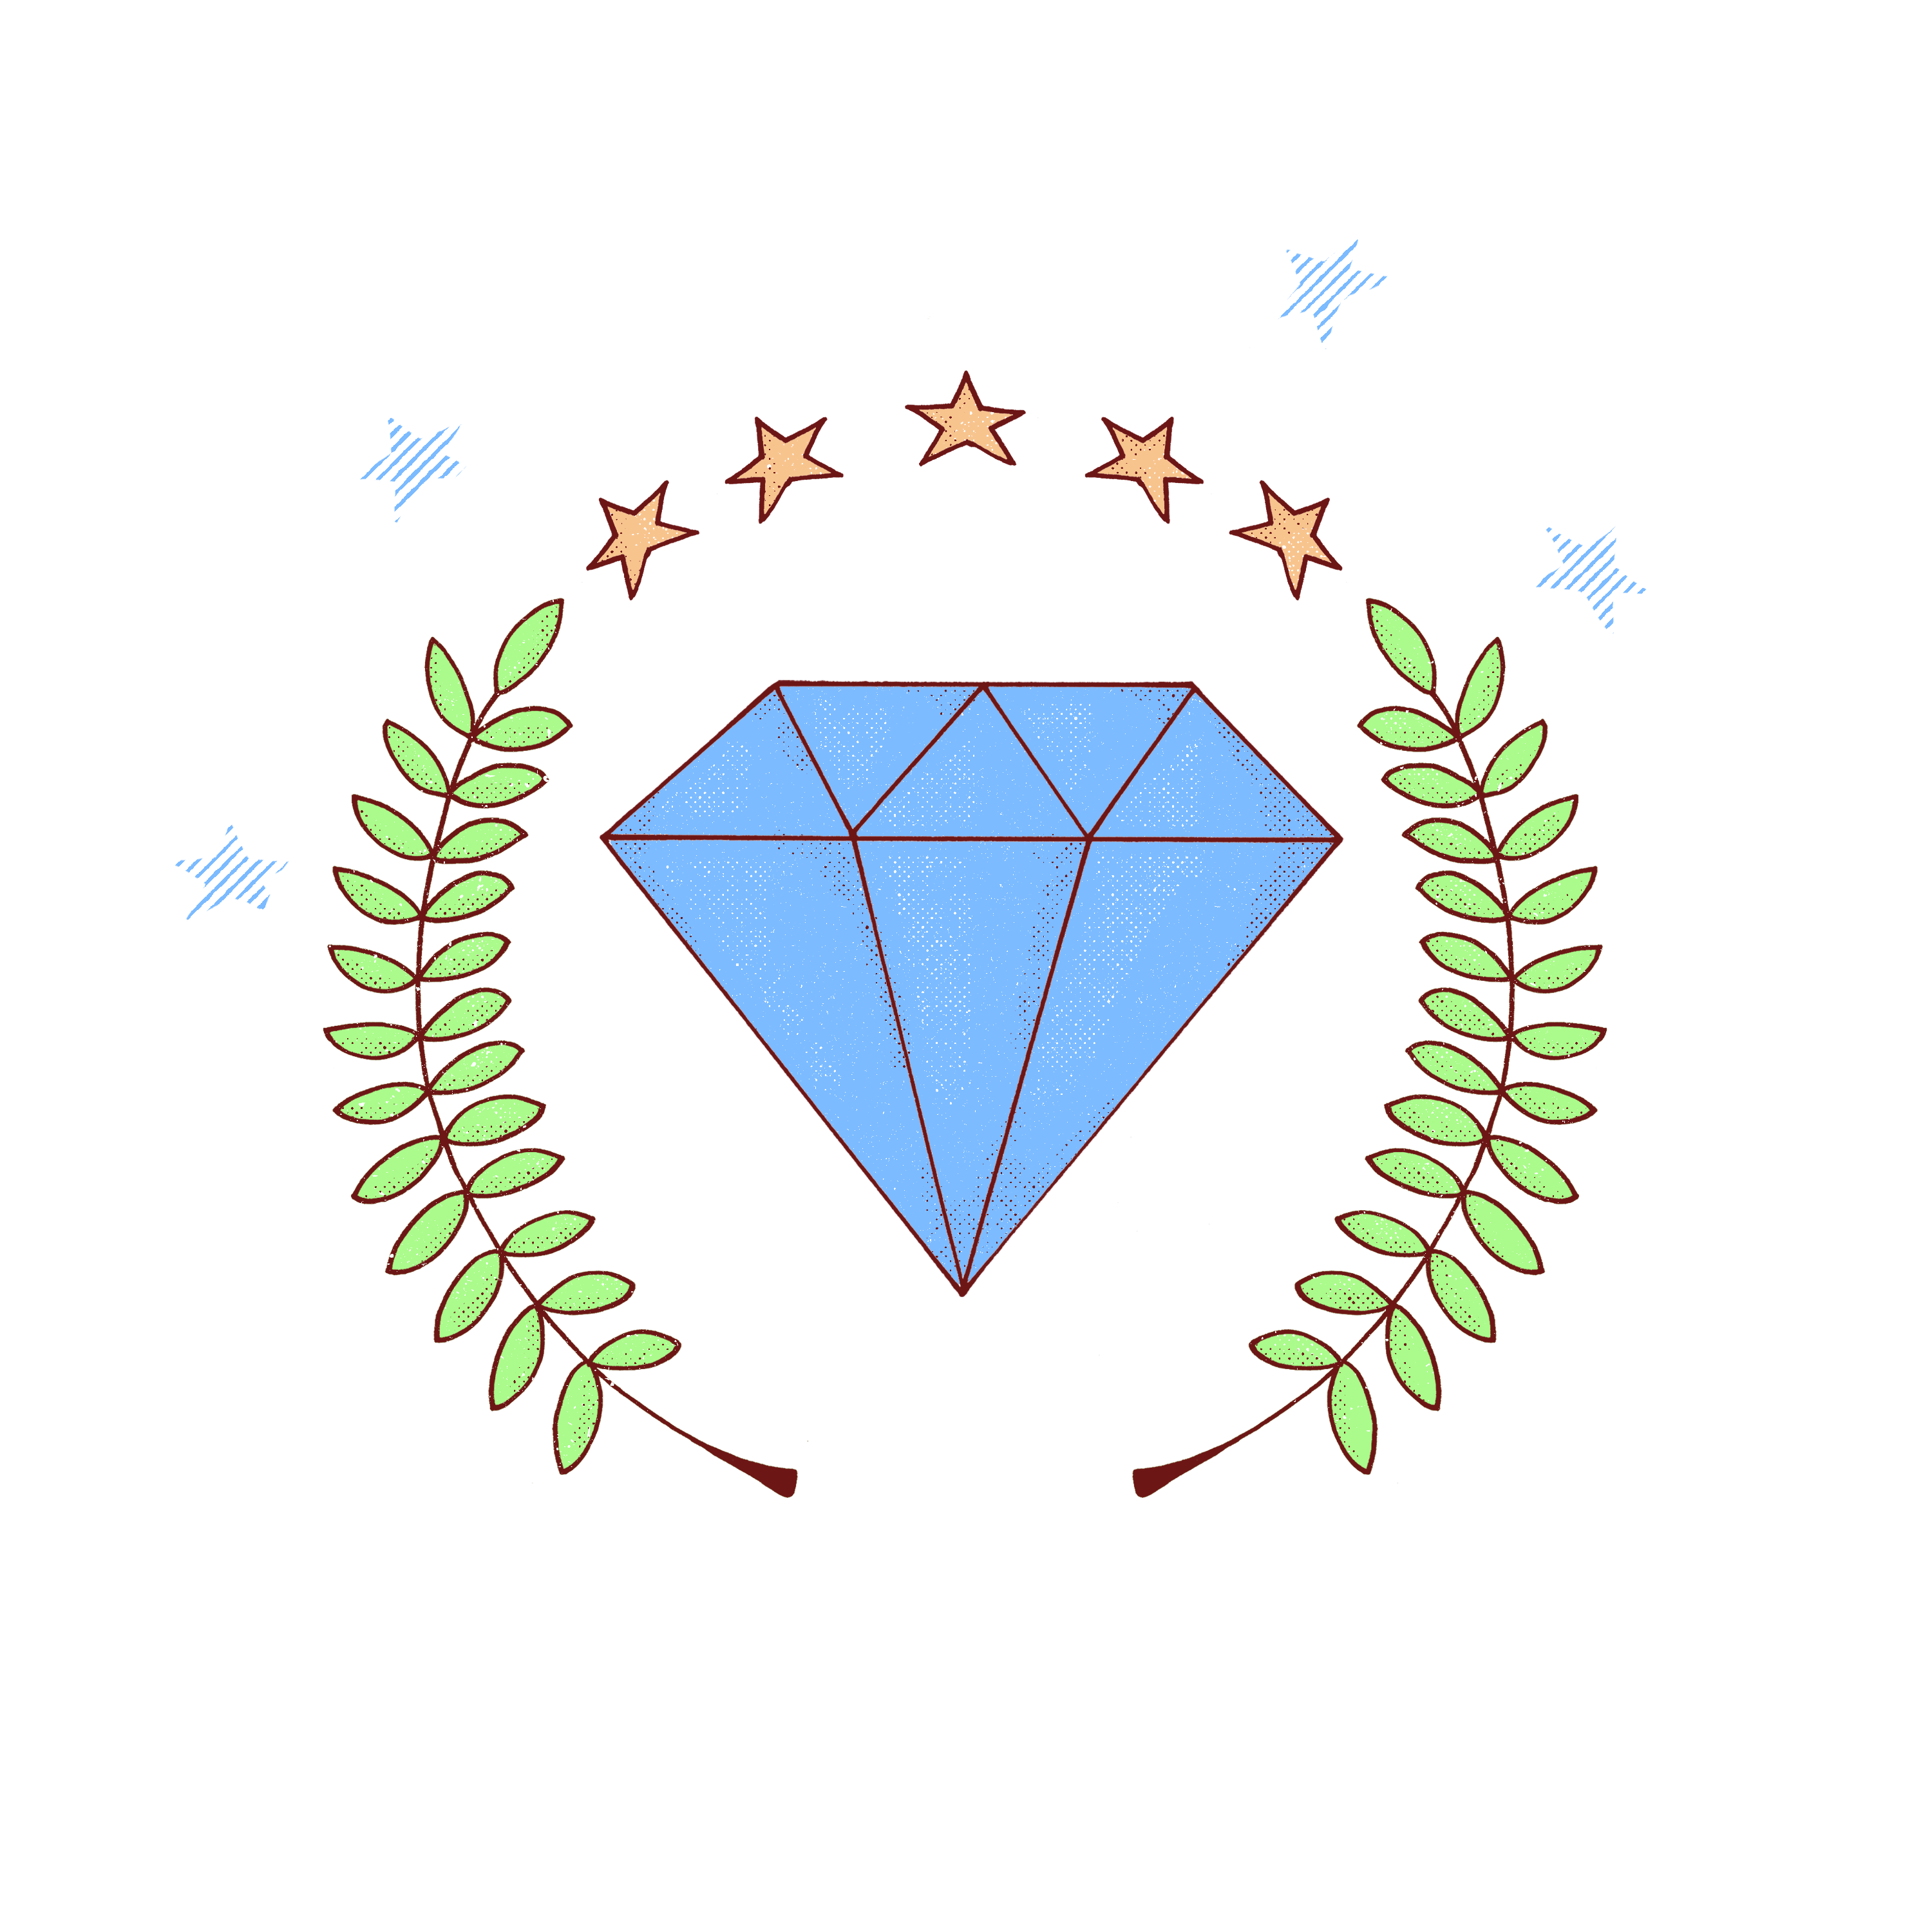 Illustration of a Diamond with a wreath and stars around it.